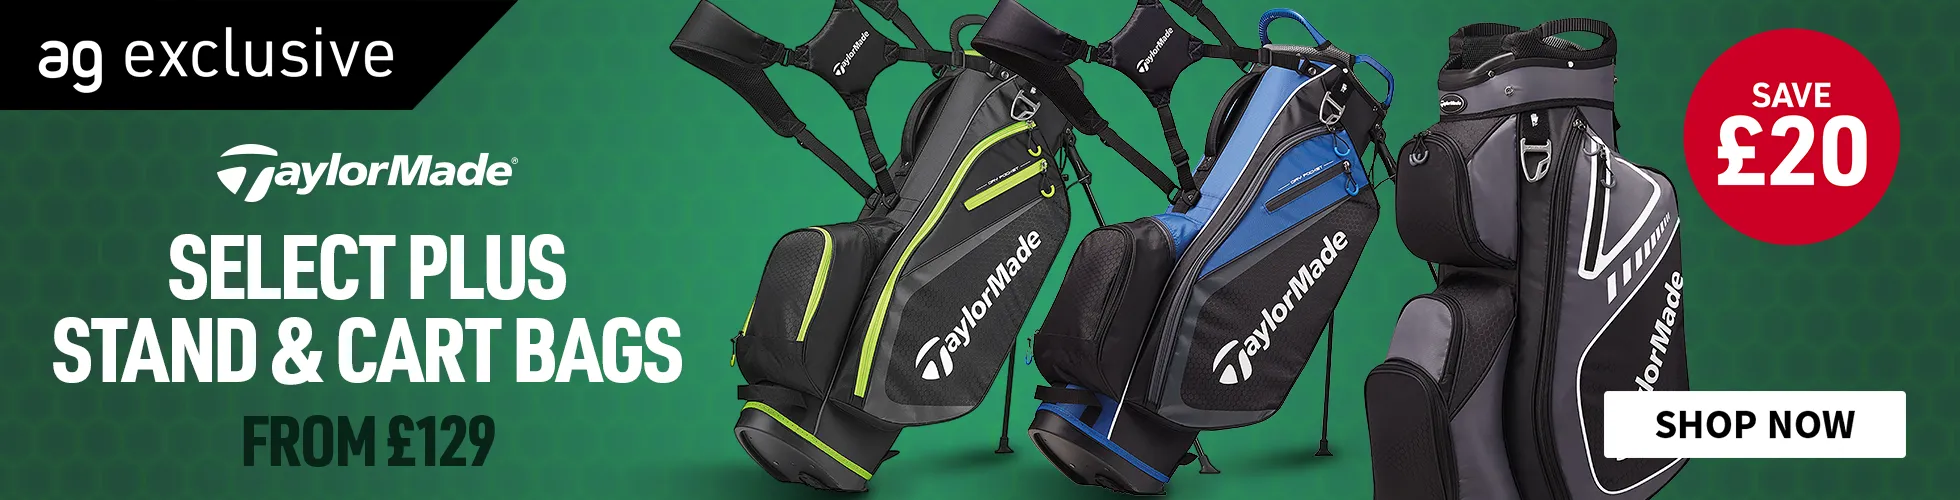 TaylorMade Select Plus Bags